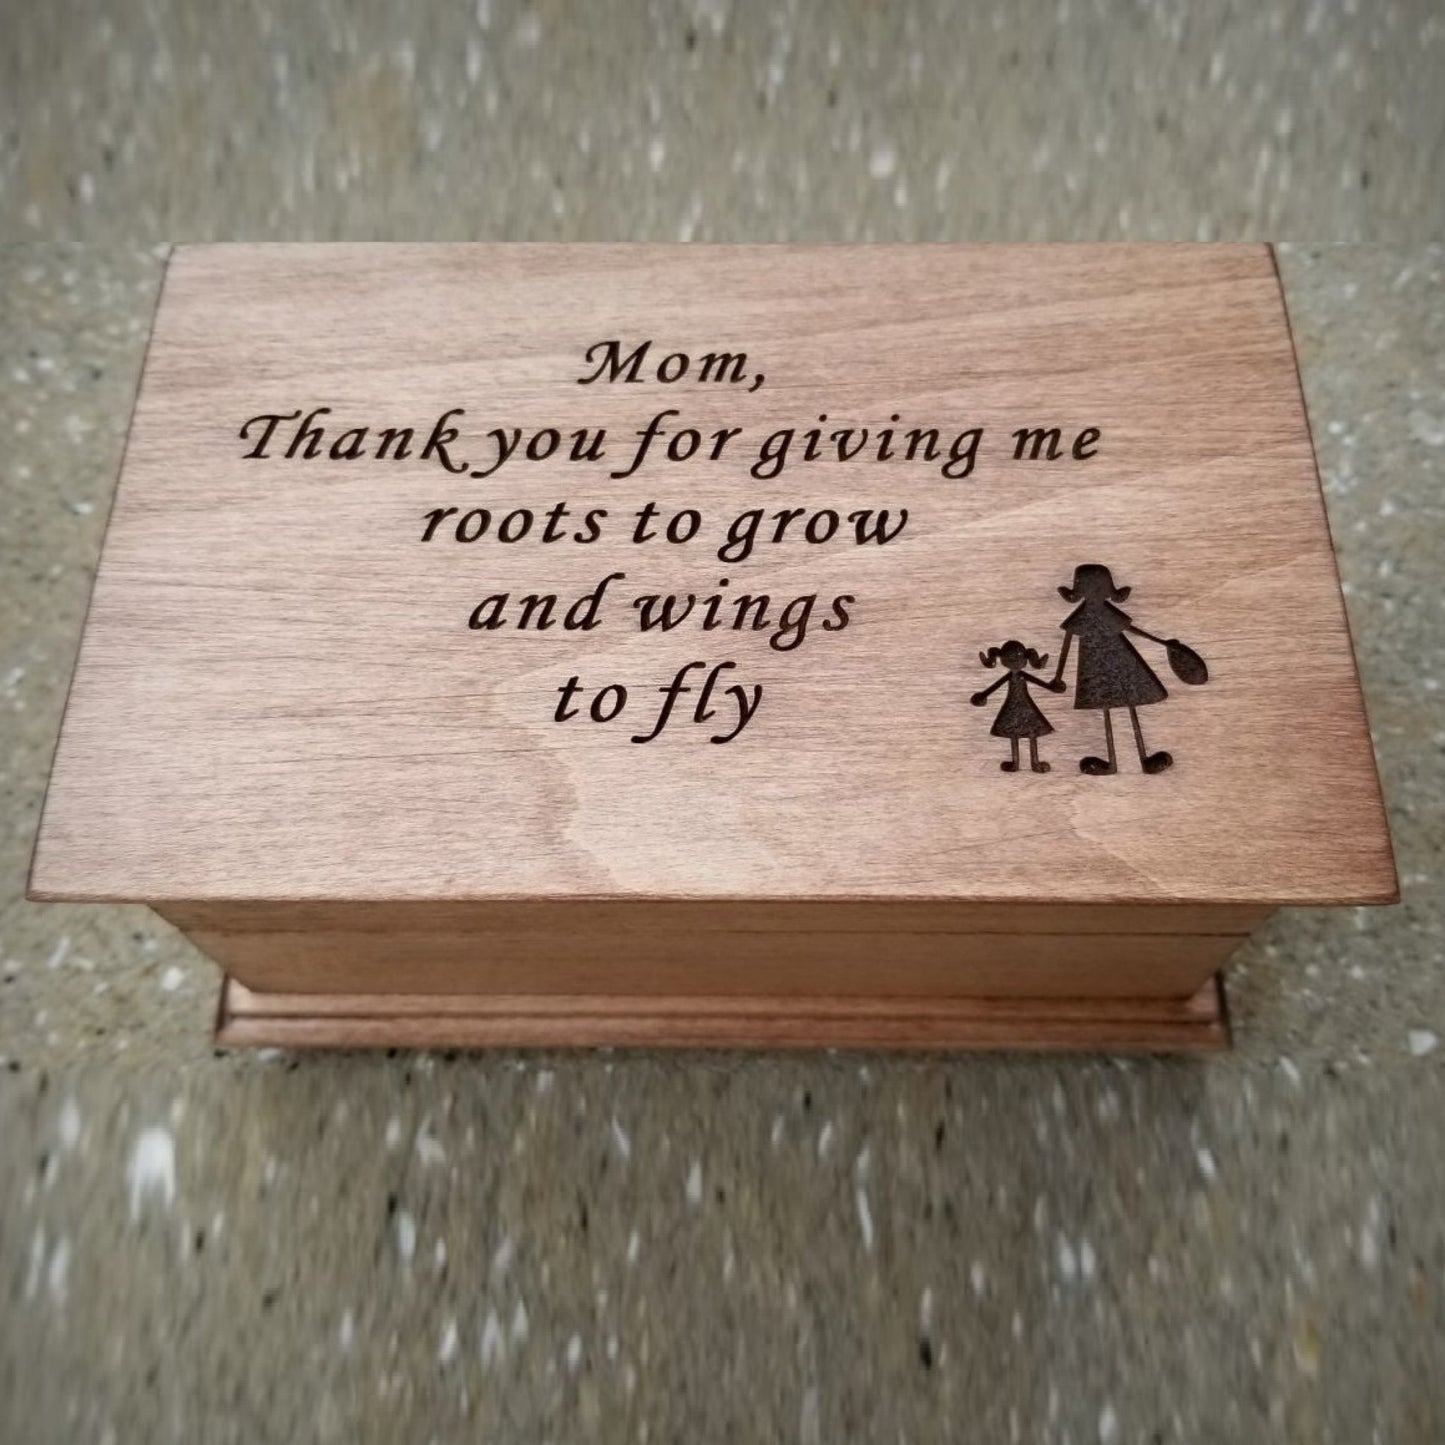 Mother of Bride jewelry box with music and color choice